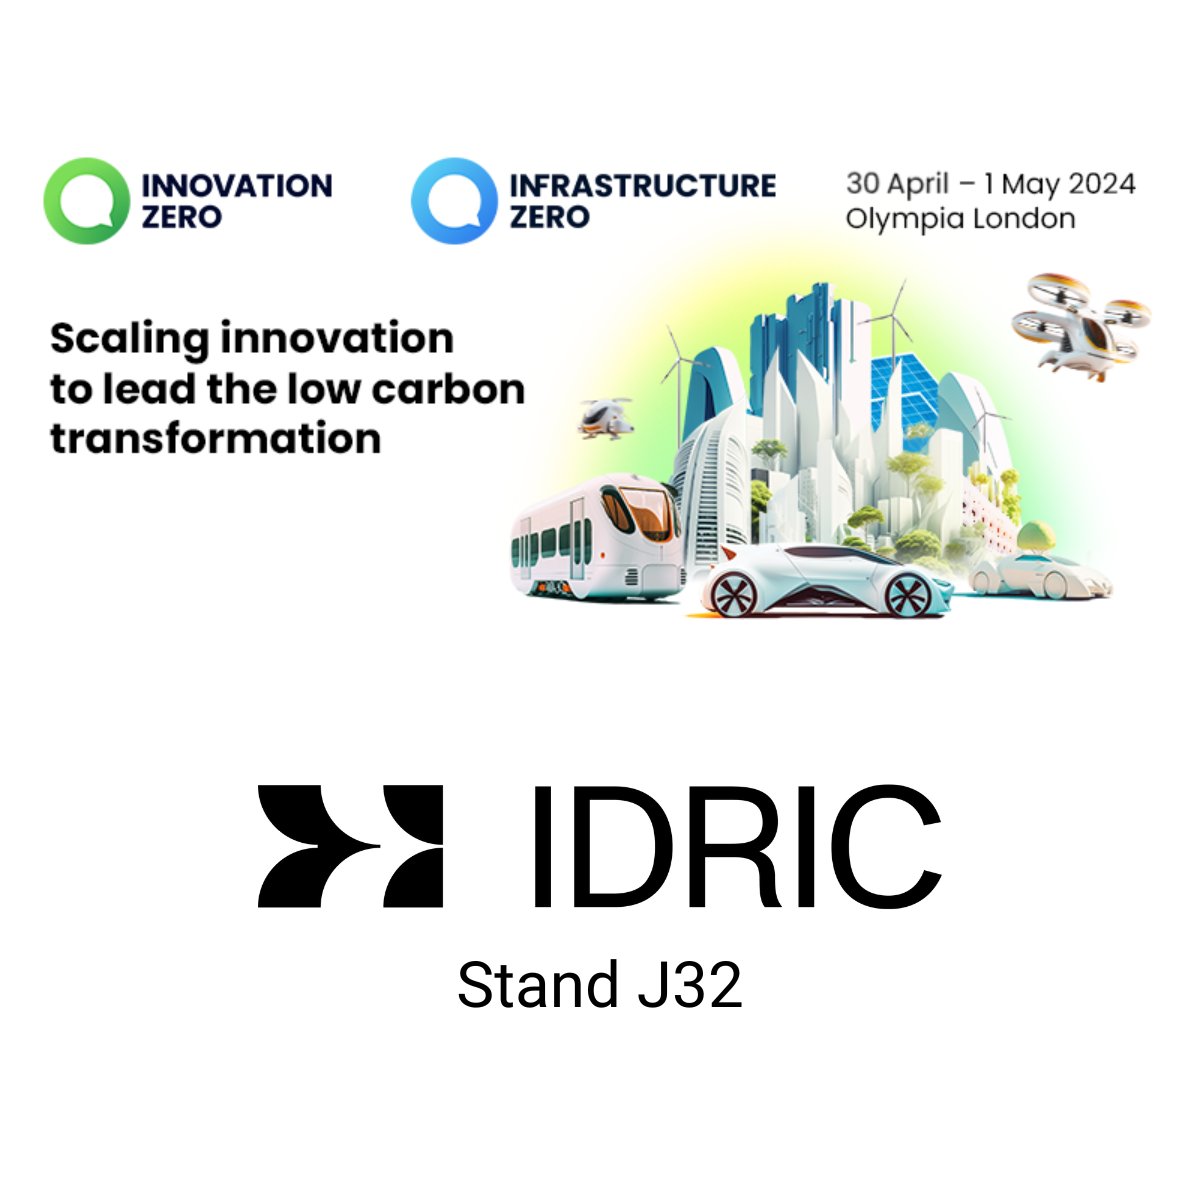 Come and chat to us @innovationzero or join our interactive workshop sessions at 3 & 4.15pm tomorrow. *Towards a Green Industrial Future: Co-creating pathways for industrial decarbonisation through research & innovation.* Register here: bit.ly/3QkgrHq